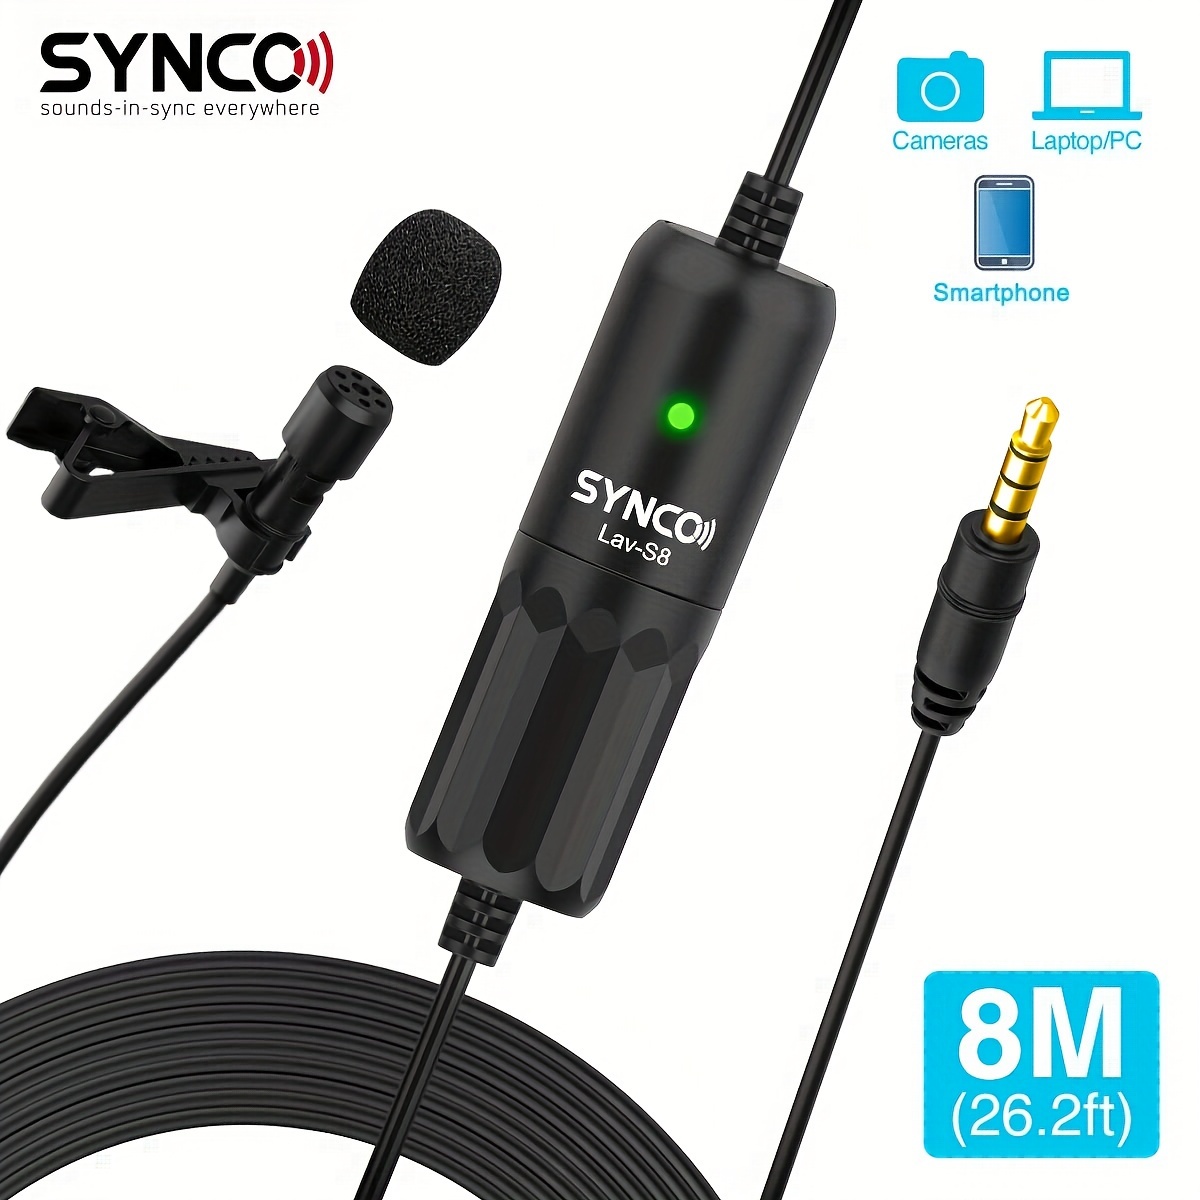 Guide to use wireless lavalier microphone for iPhone – SYNCO